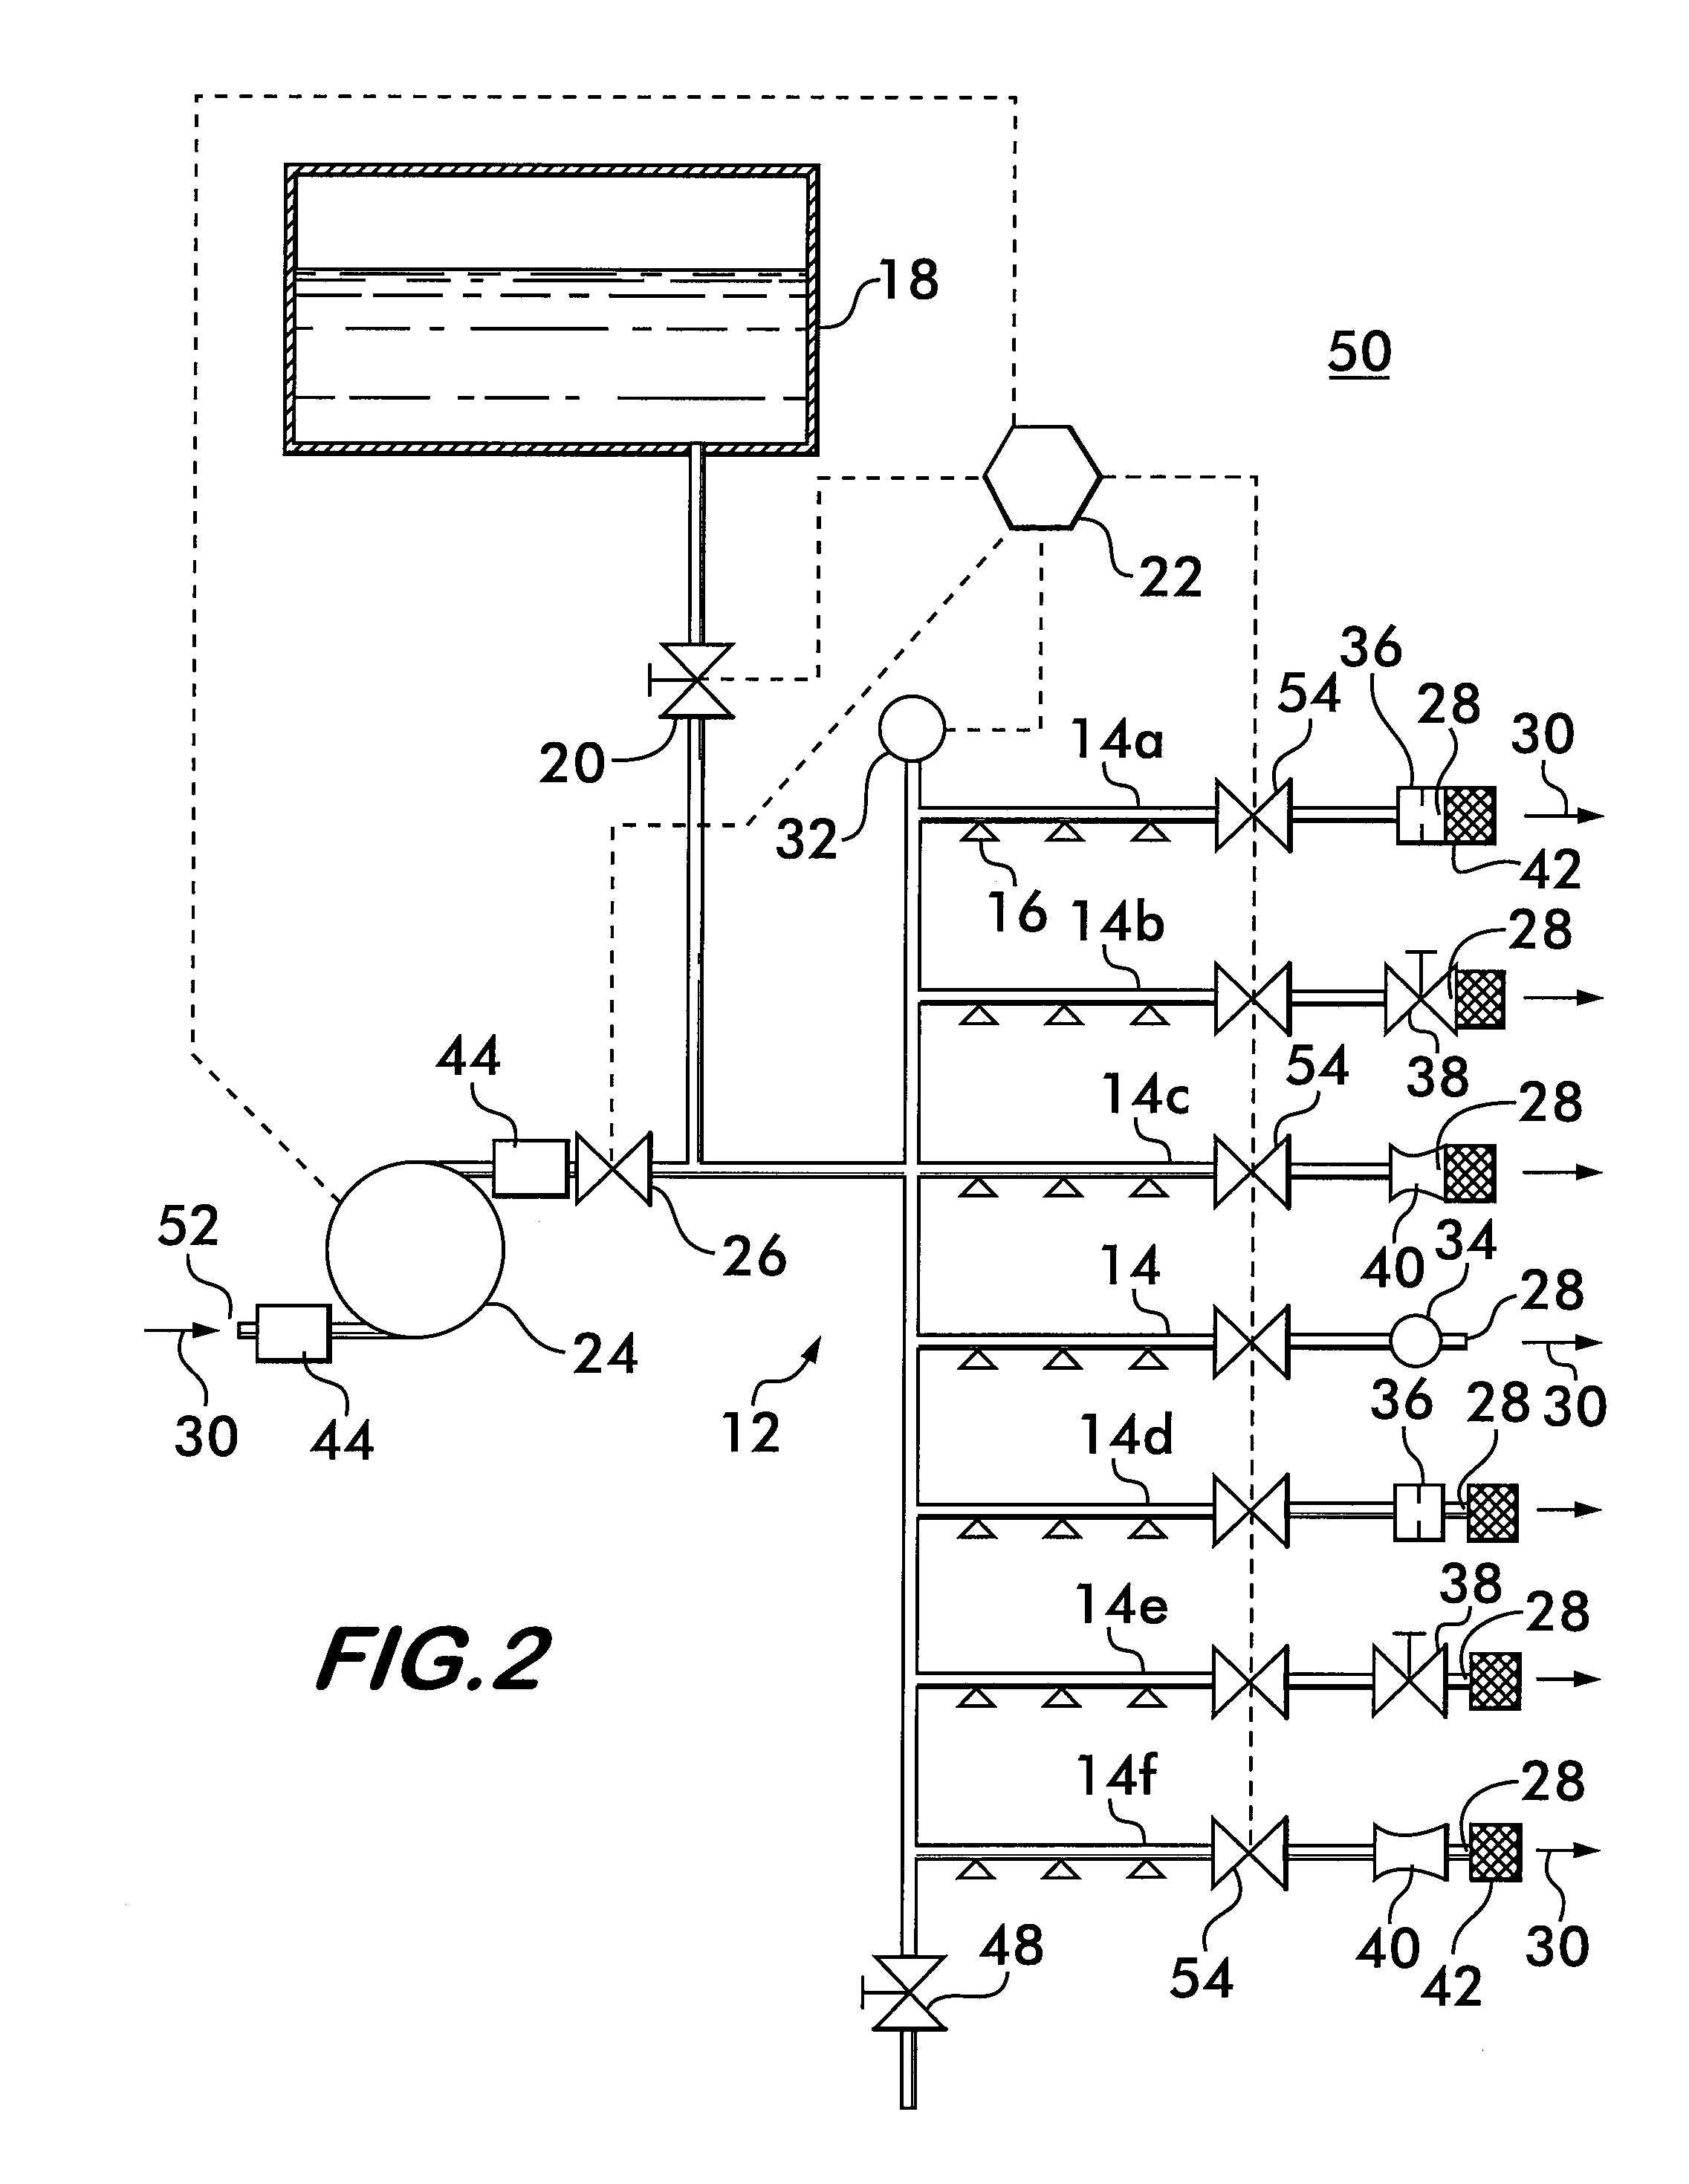 Method and apparatus for drying sprinkler piping networks